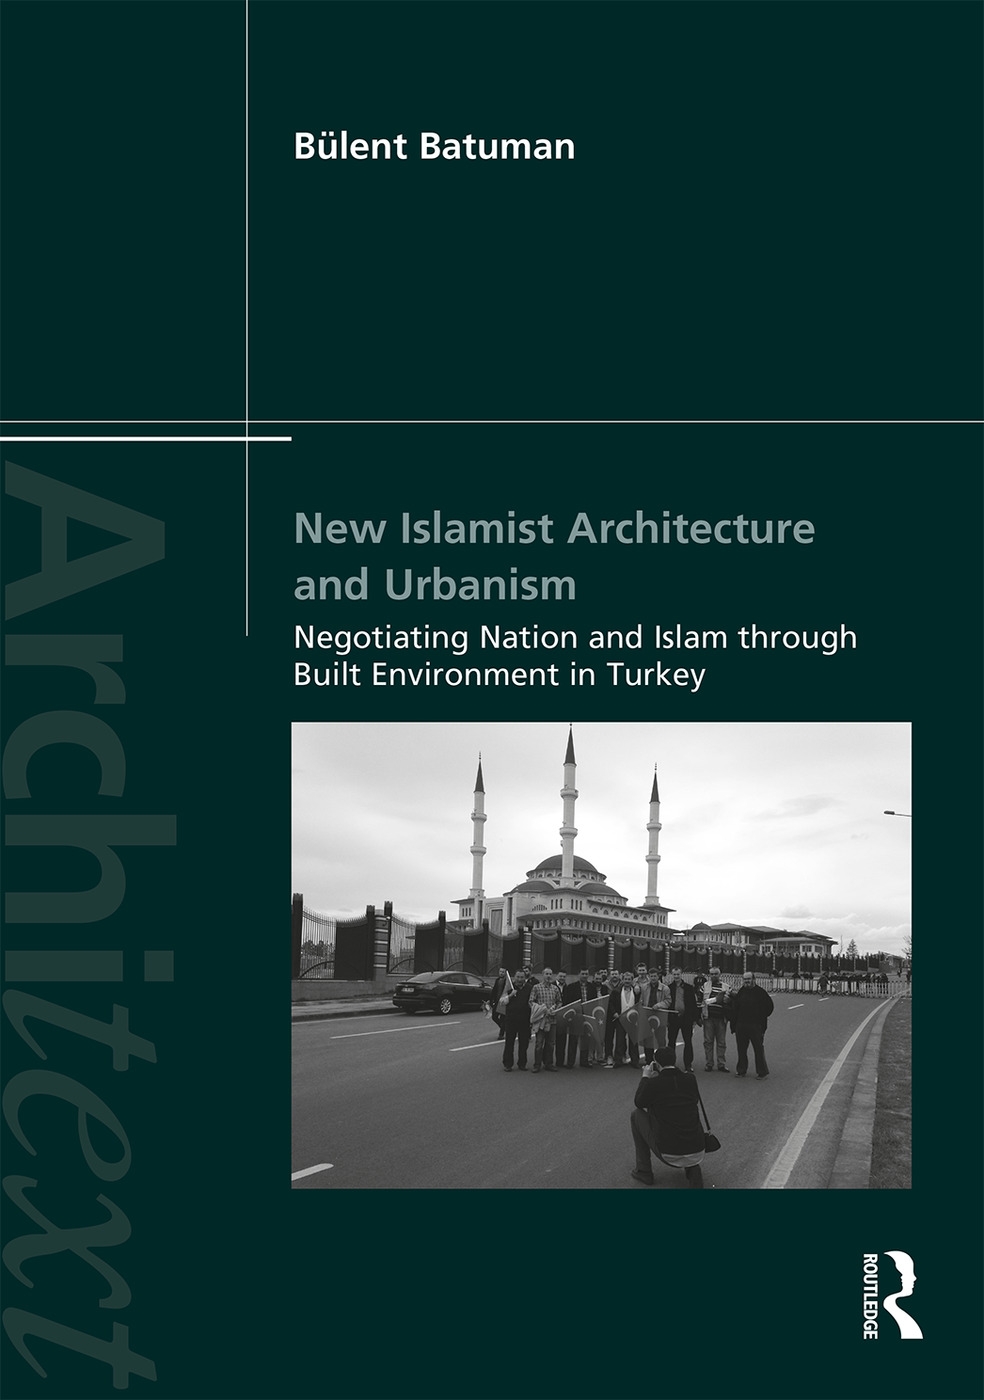 New Islamist Architecture and Urbanism: Negotiating Nation and Islam Through Built Environment in Turkey